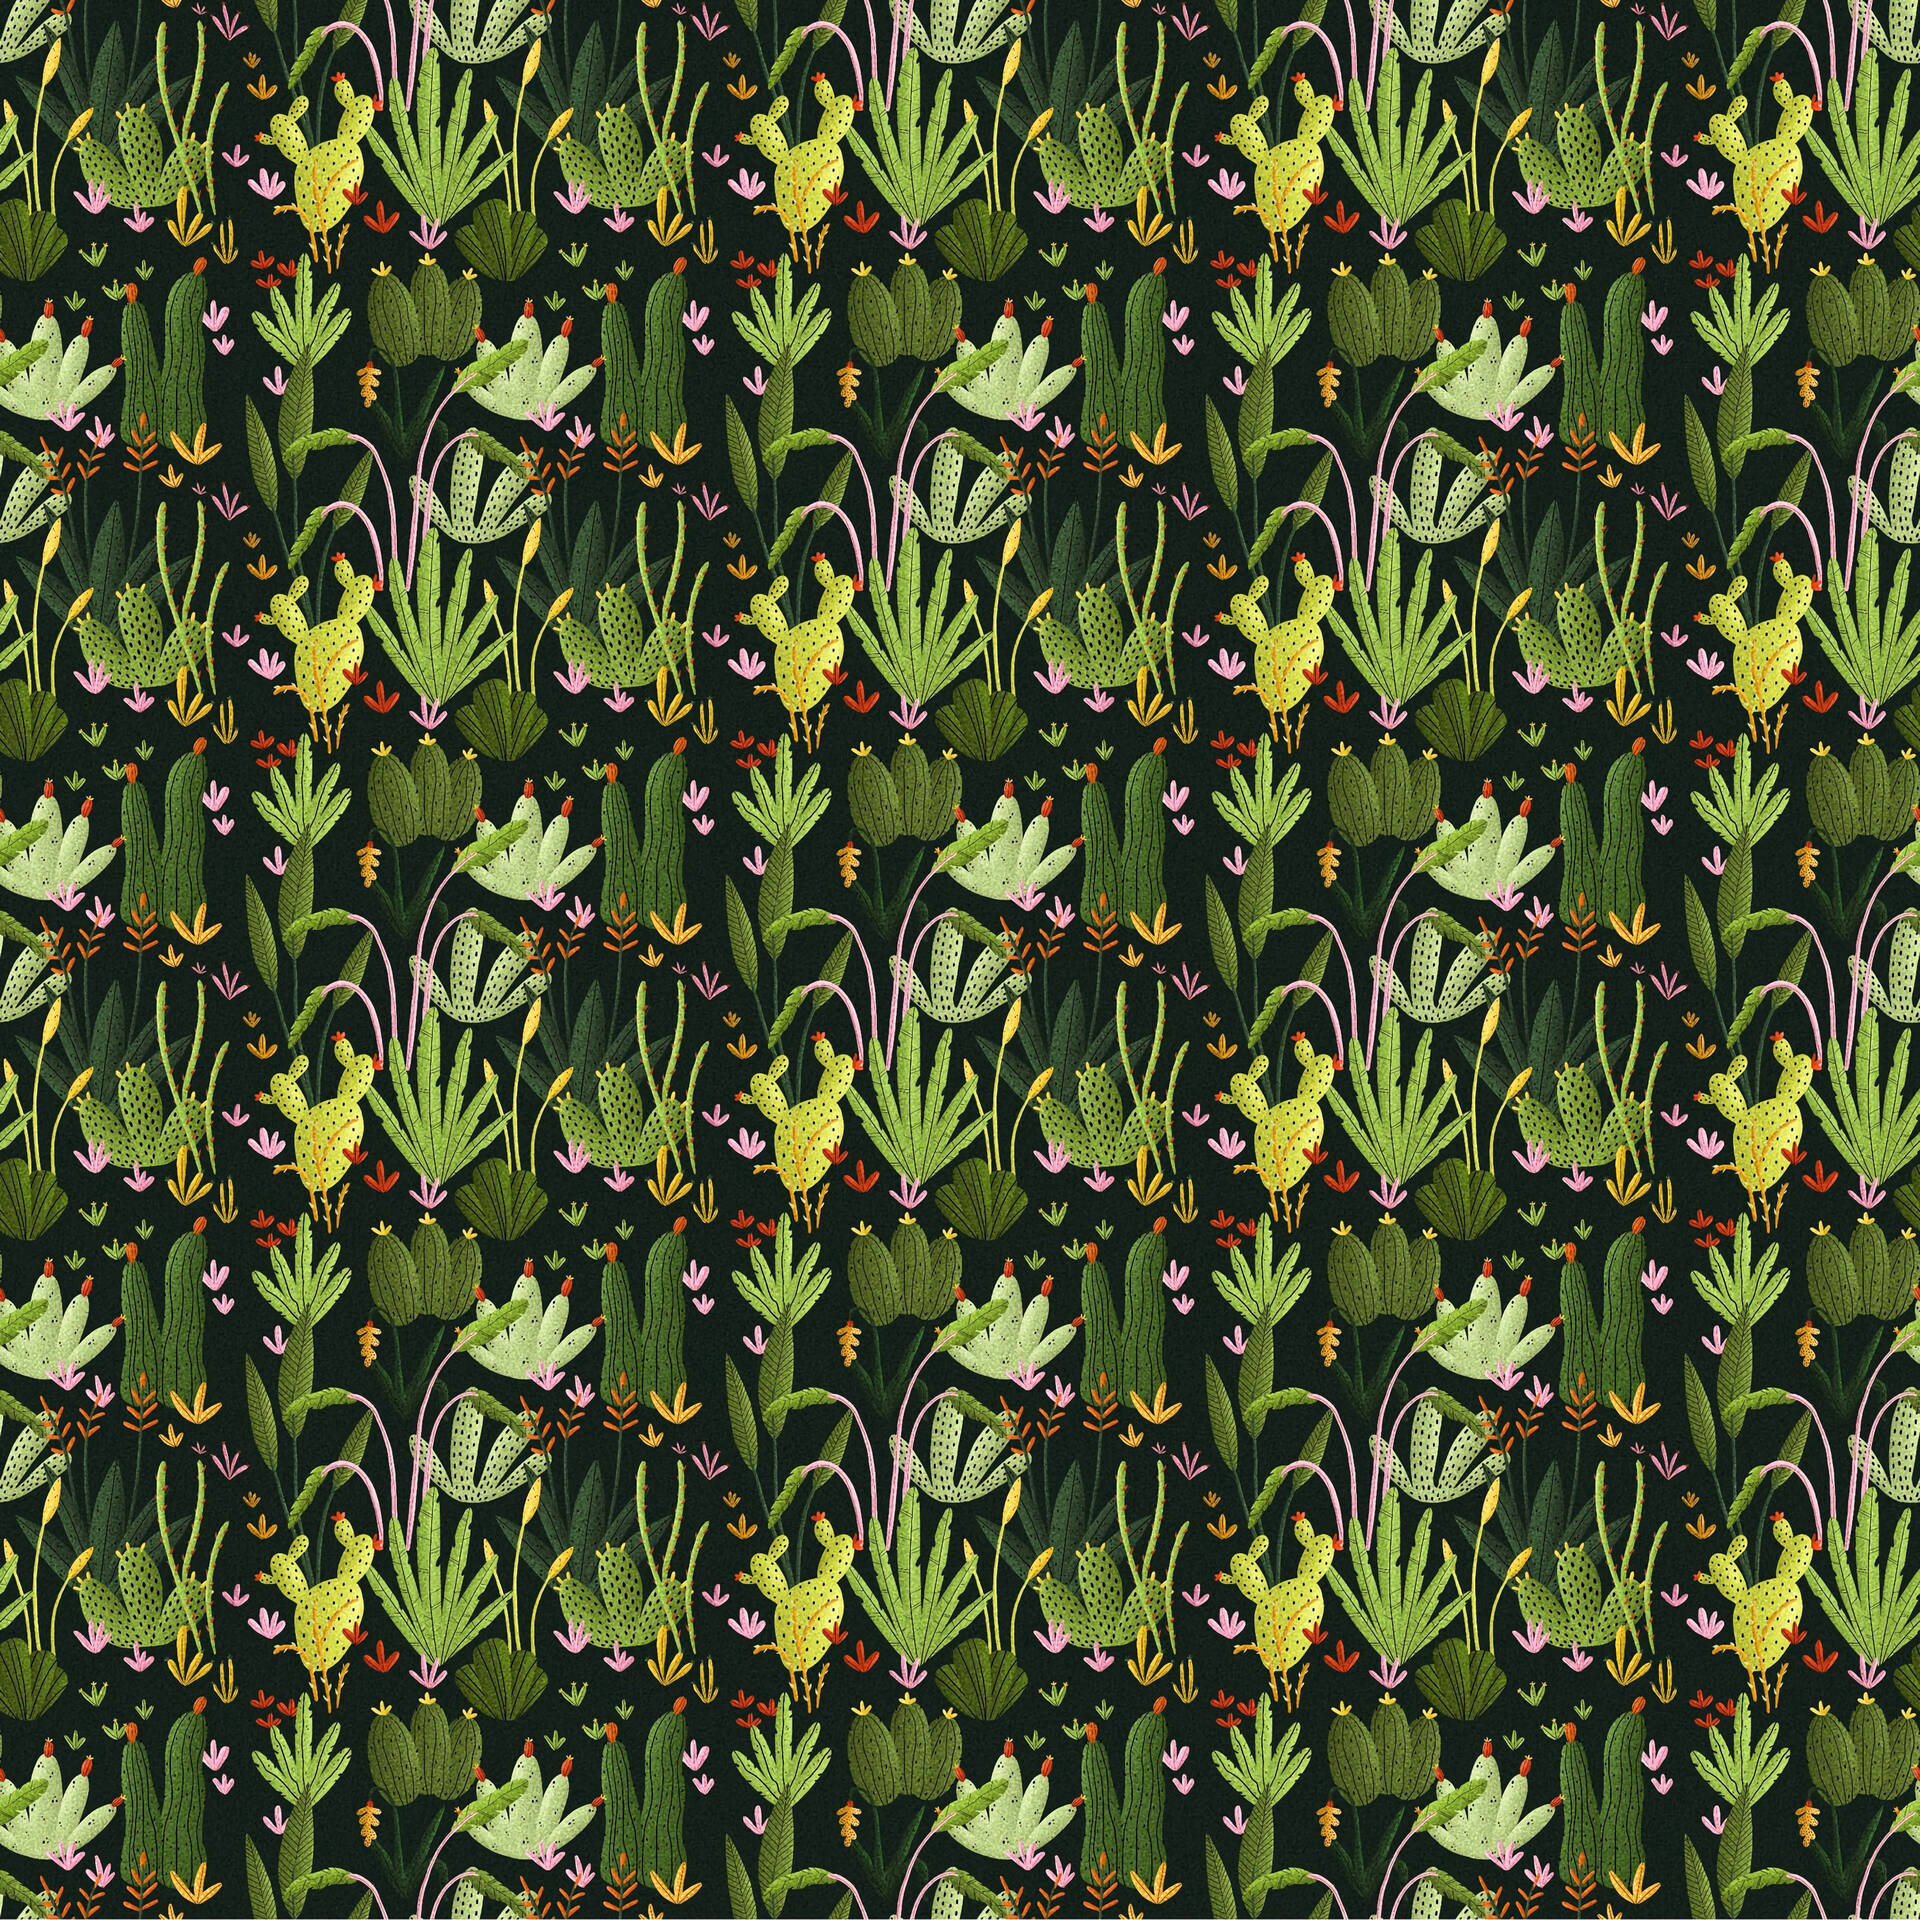 Explore Your Wild Side with the Dark Girly Vintage Cactus Pattern Wallpaper